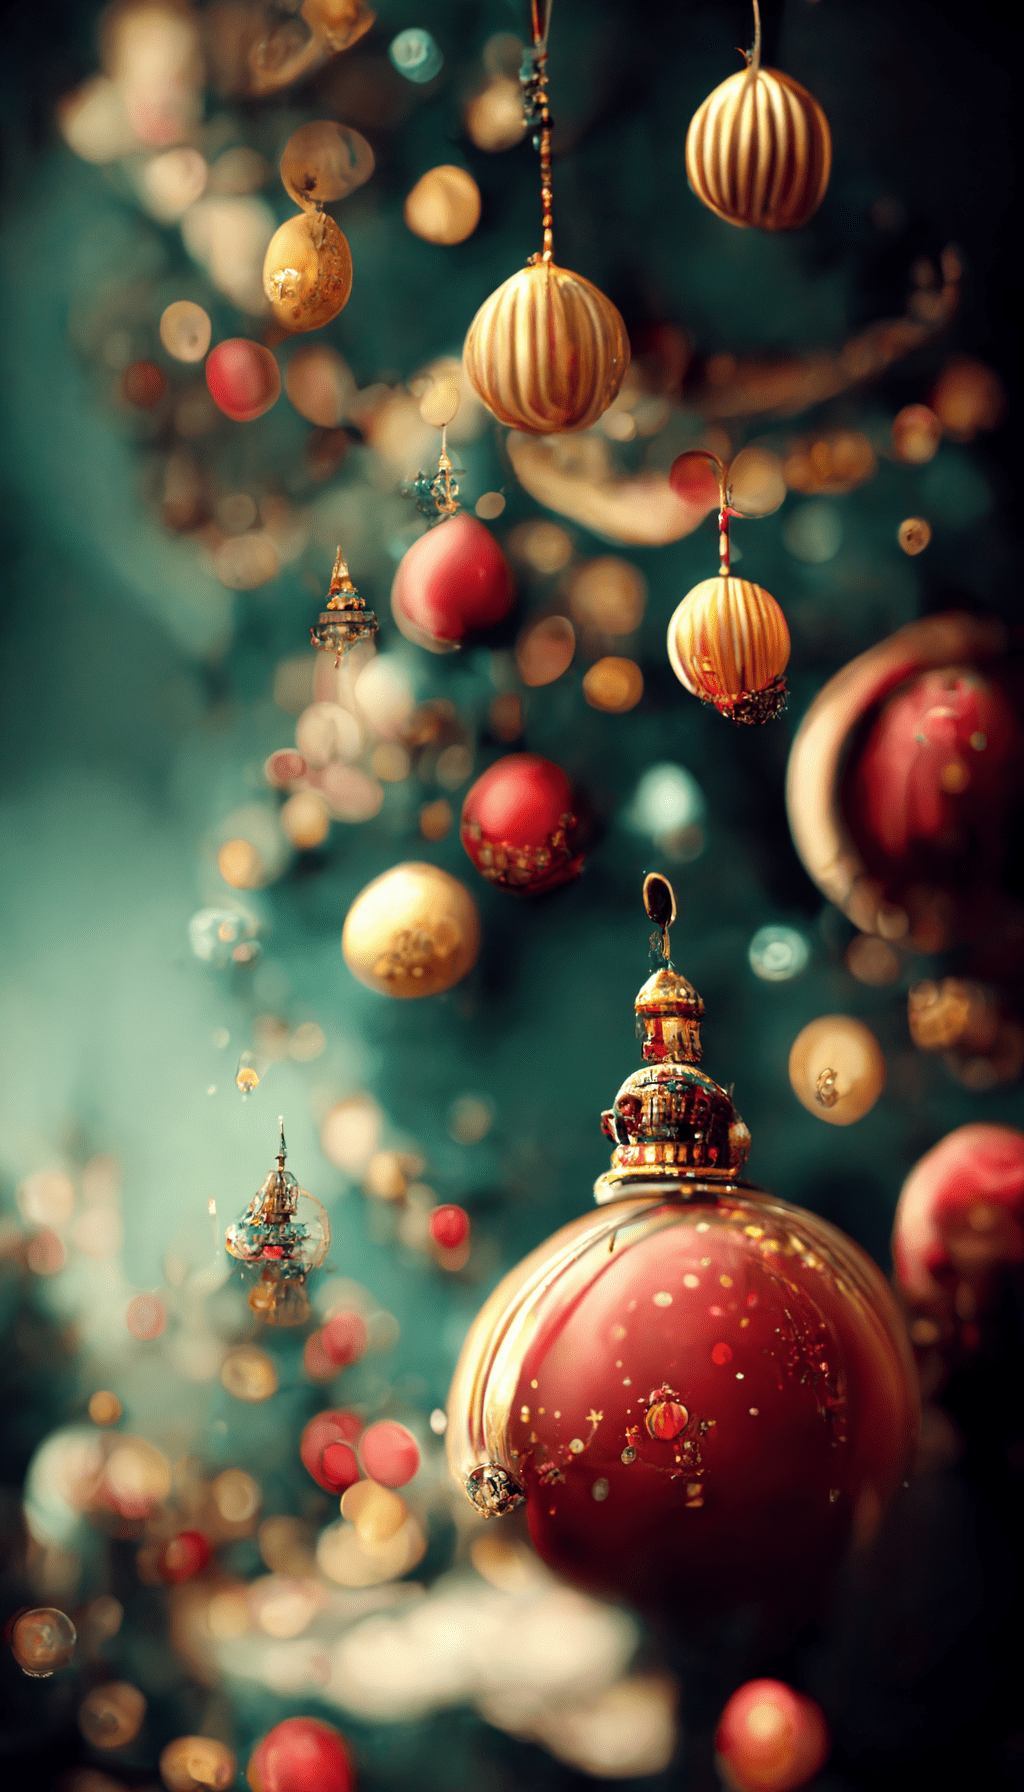 A christmas tree with ornaments hanging from it - Christmas